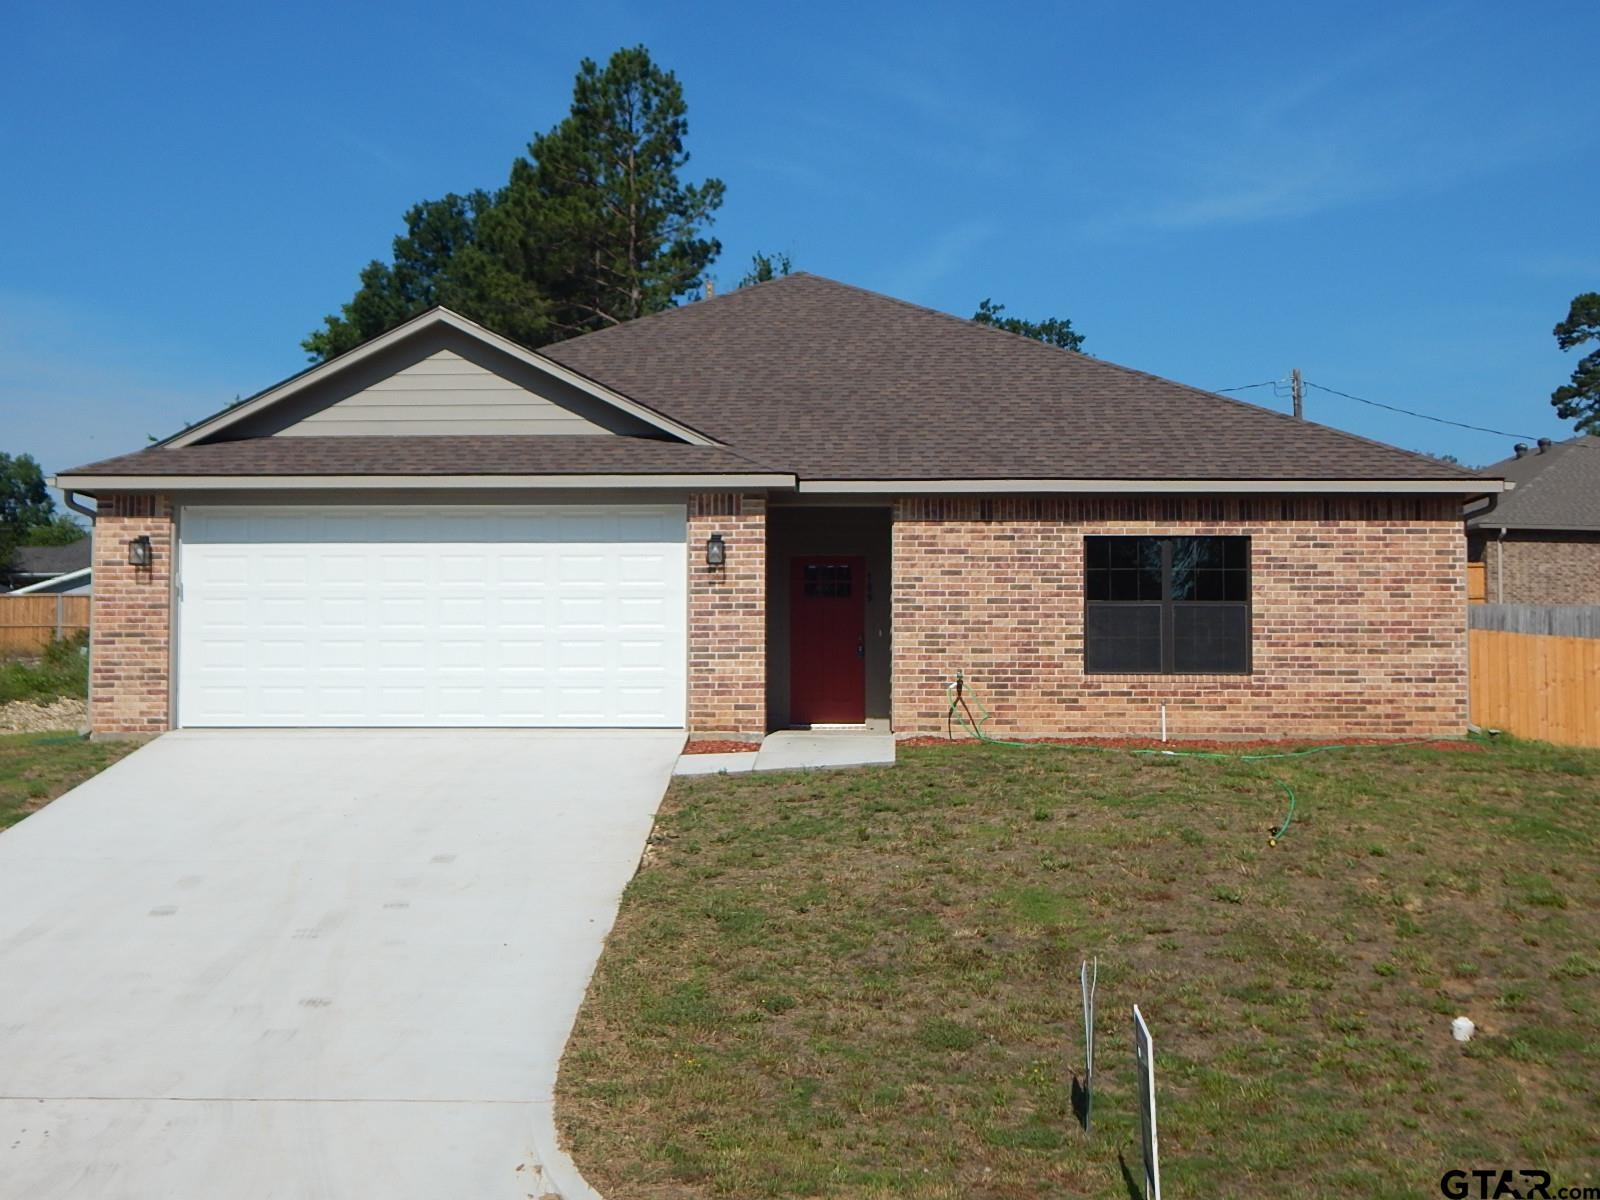 NEW CONSTRUCTION !!!!! 3/2/2 BRICK IN GILMER, 1,834 SQ. FT., 9 FOOT CEILINGS, 2 CAR TALL GARAGE FORBIGTRUCK, GRANITE COUNTER TOPS, CUSTOM LIGHTING, CABINETS, LARGE PANTRY, GREAT FLOOR PLAN.CLOSETO SCHOOLS AND SHOPS. SHOULD BE COMPLET IN 60 DAY. CALL FOR APPOINTMENT